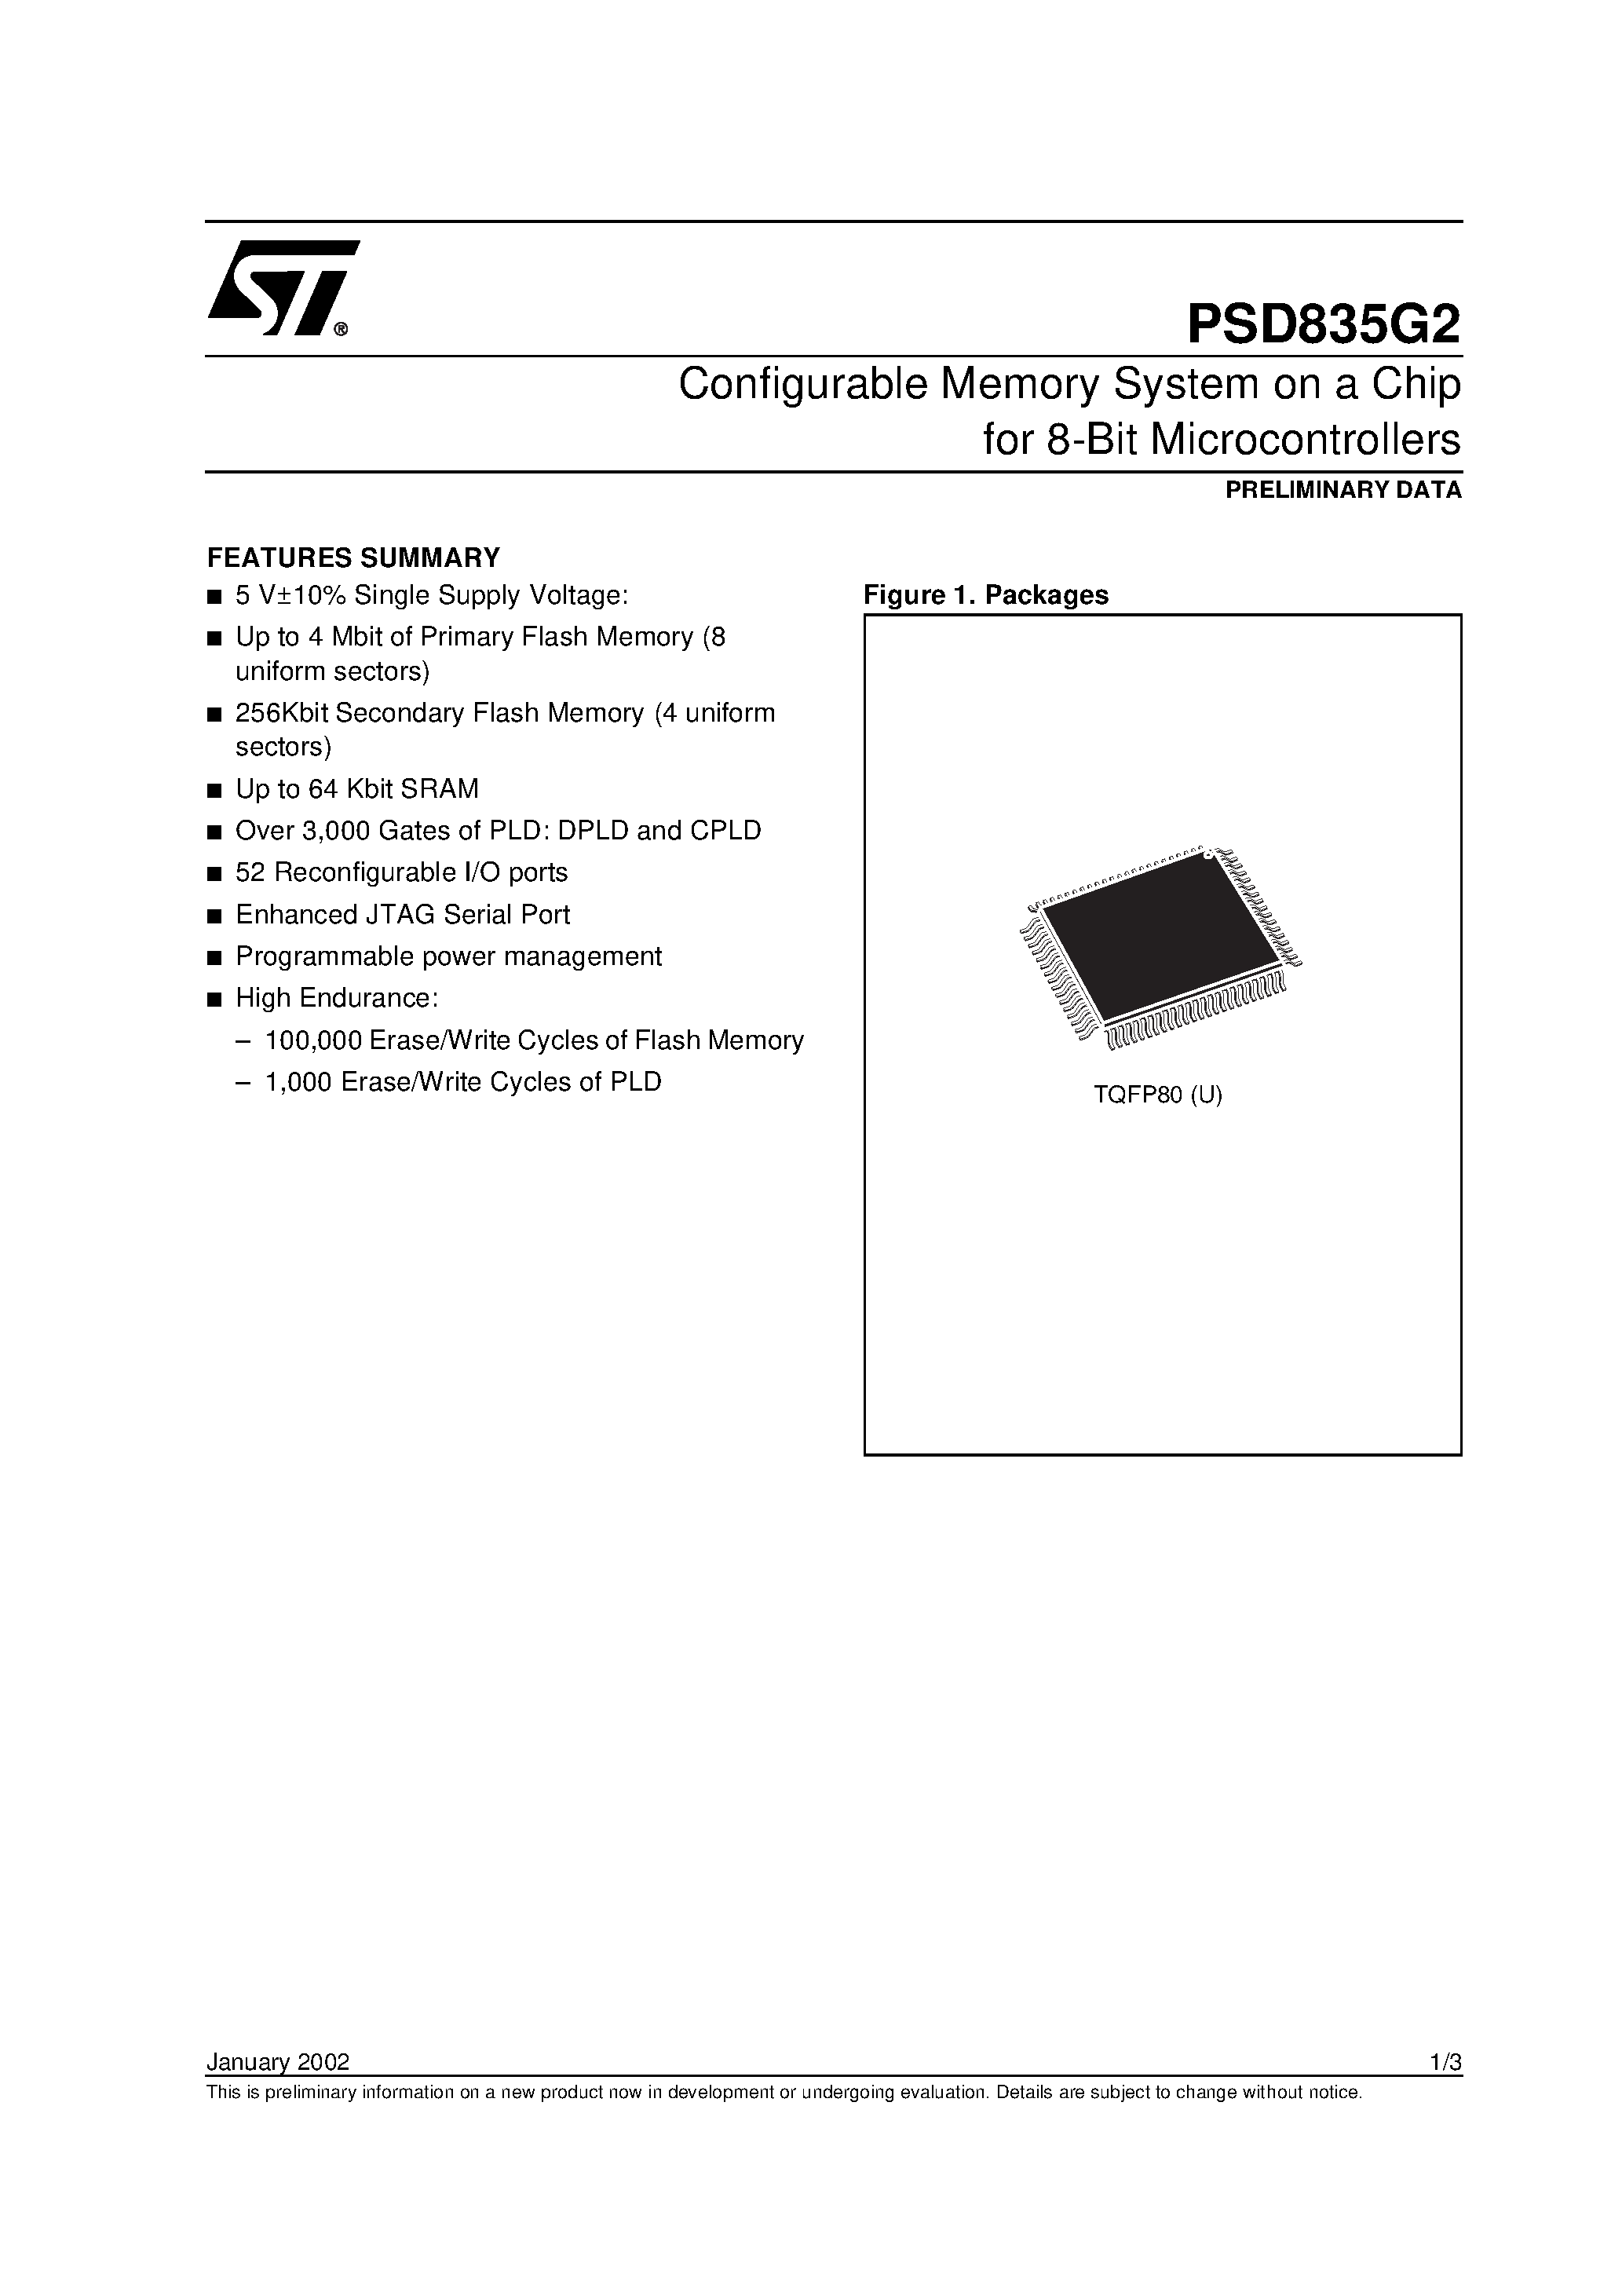 Datasheet PSD835F1V-A-90JI - Configurable Memory System on a Chip for 8-Bit Microcontrollers page 1